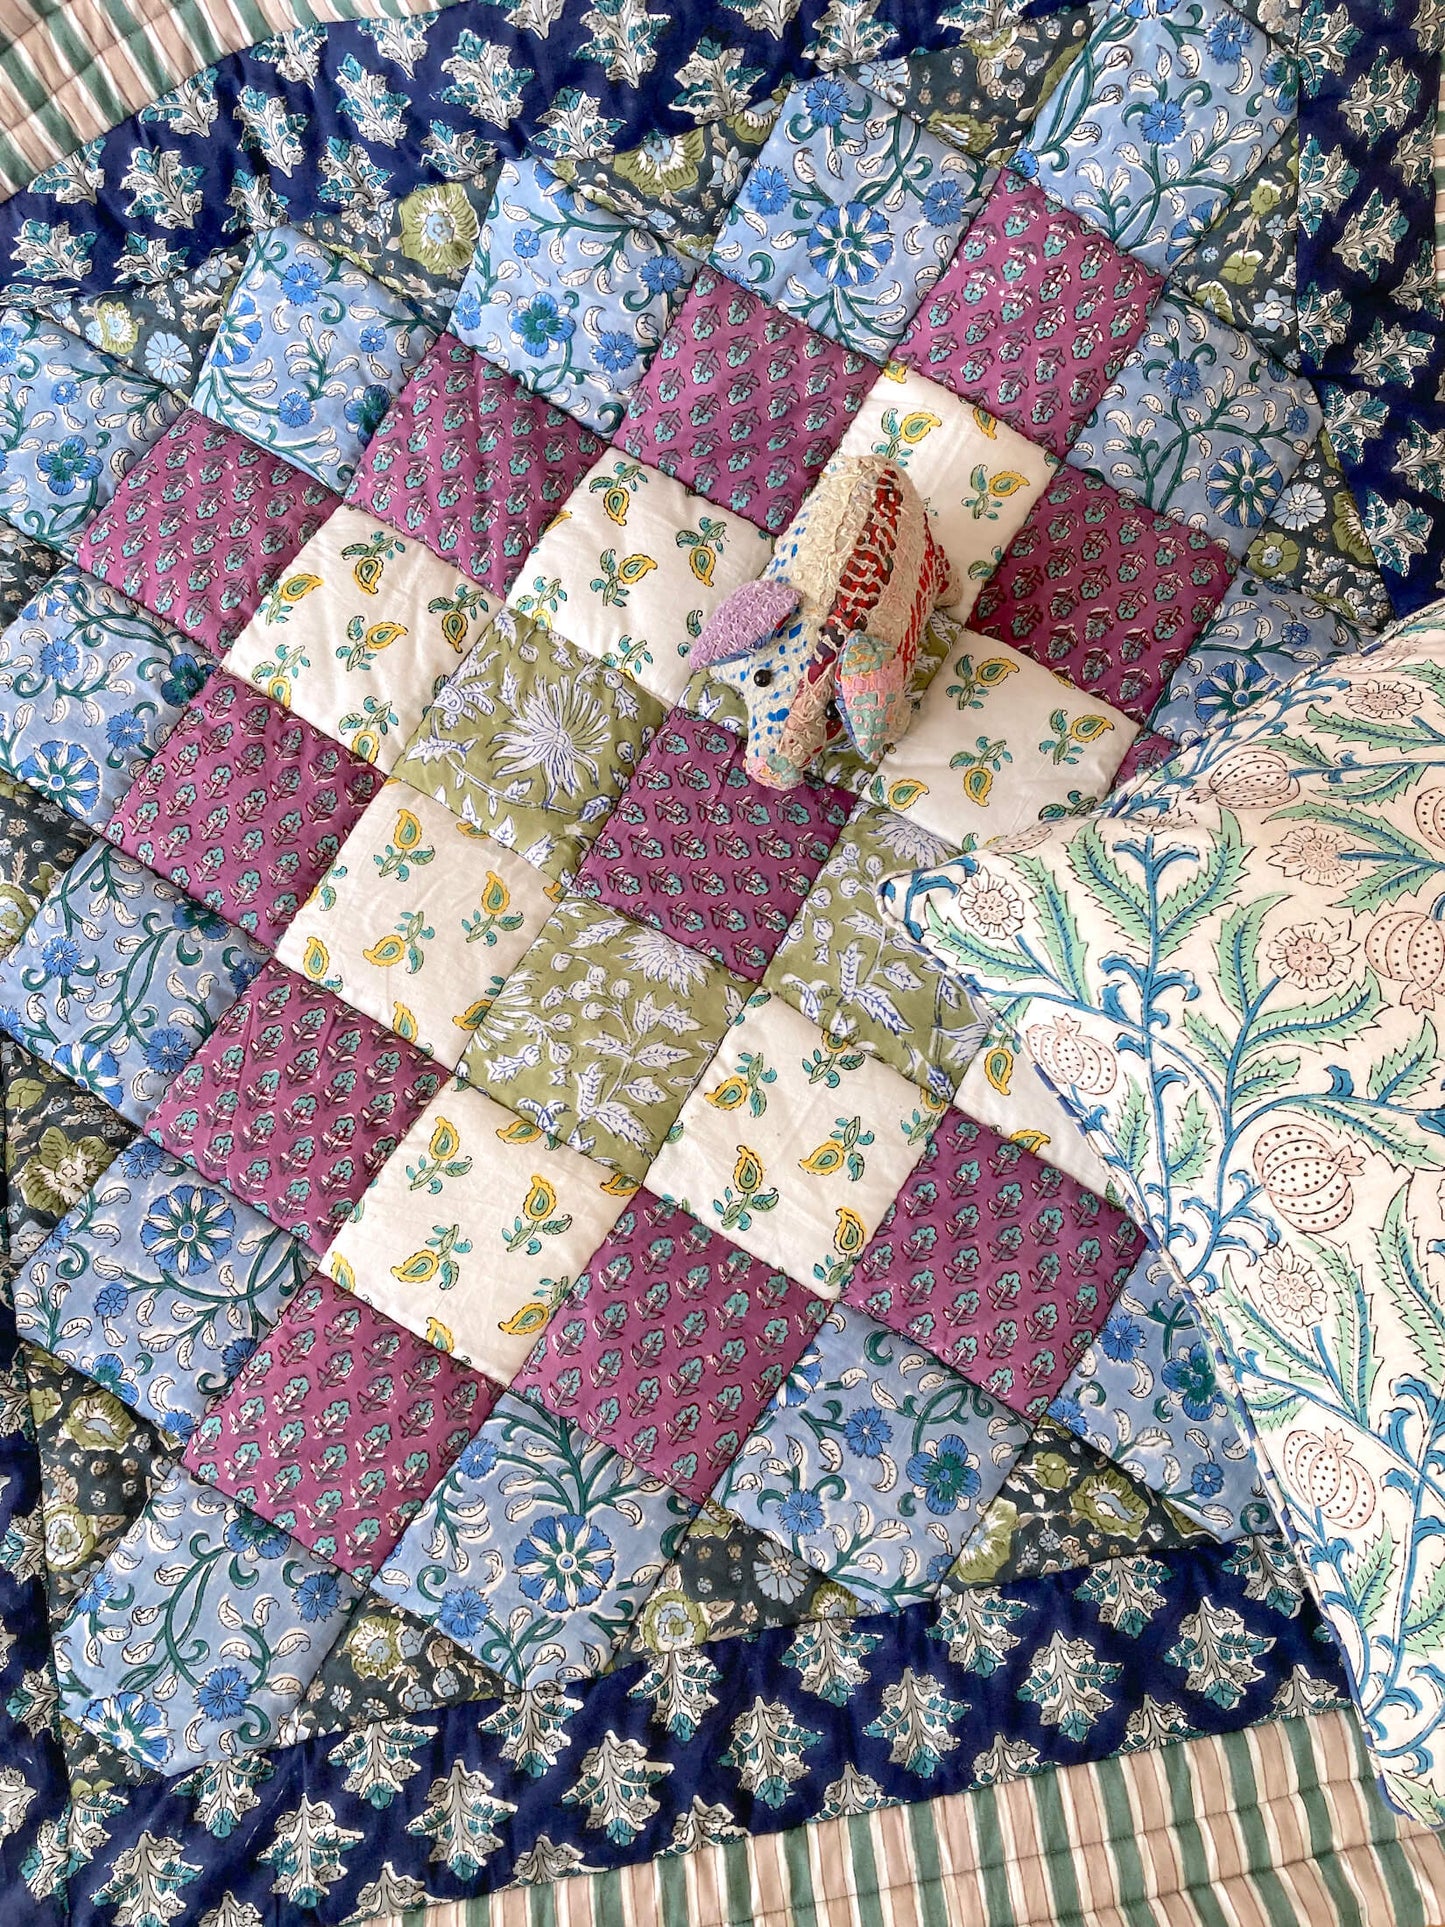 Hand Block Print Patchwork Small Quilt #189-A